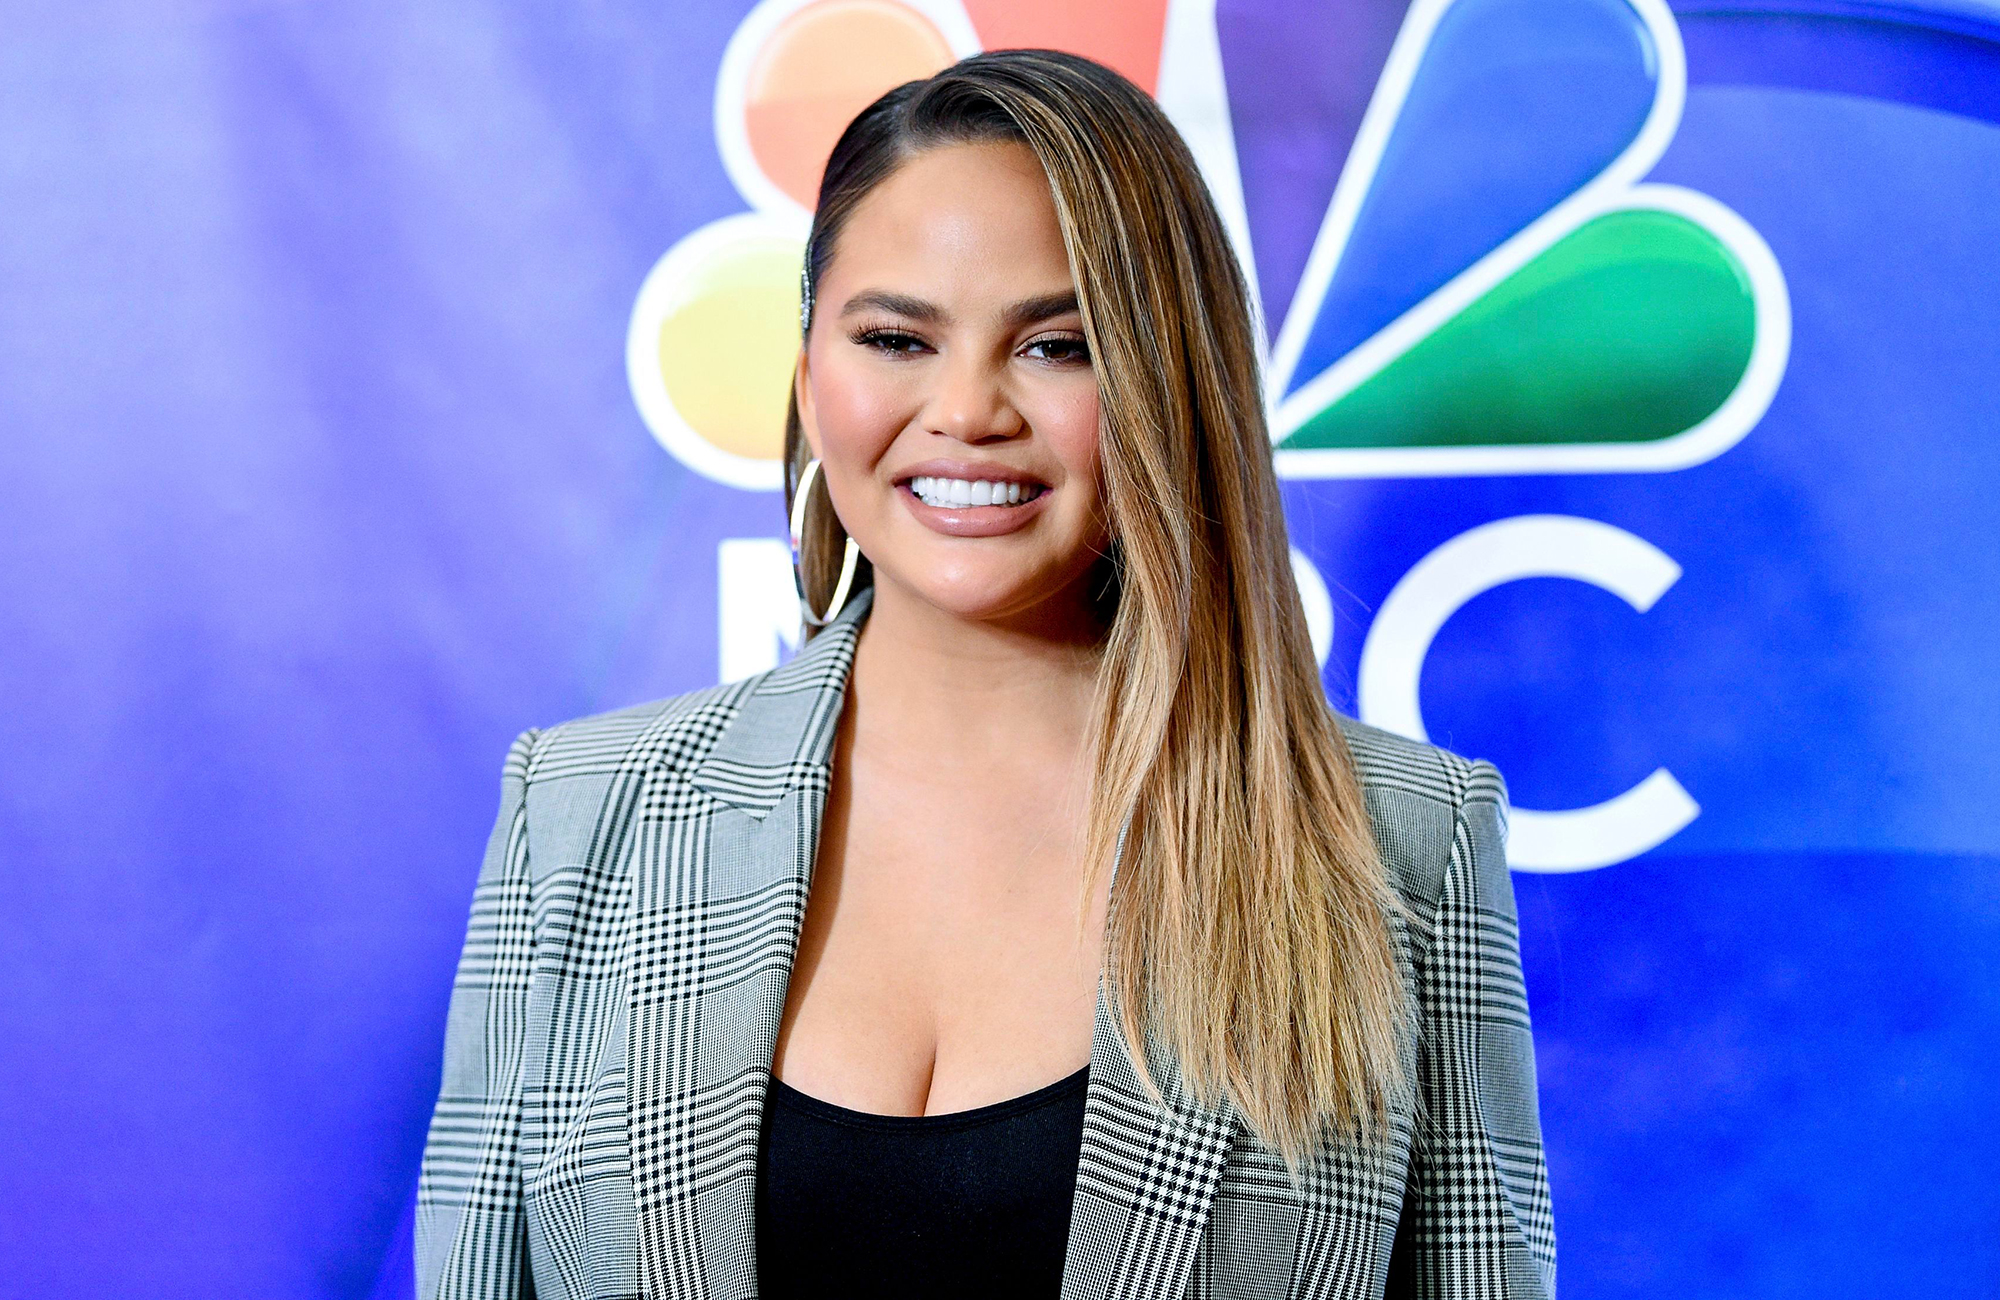 https://www.usmagazine.com/wp-content/uploads/2019/11/8-Things-We-Learned-From-Chrissy-Teigen-New-Cravings-Website-03.jpg?quality=78&strip=all